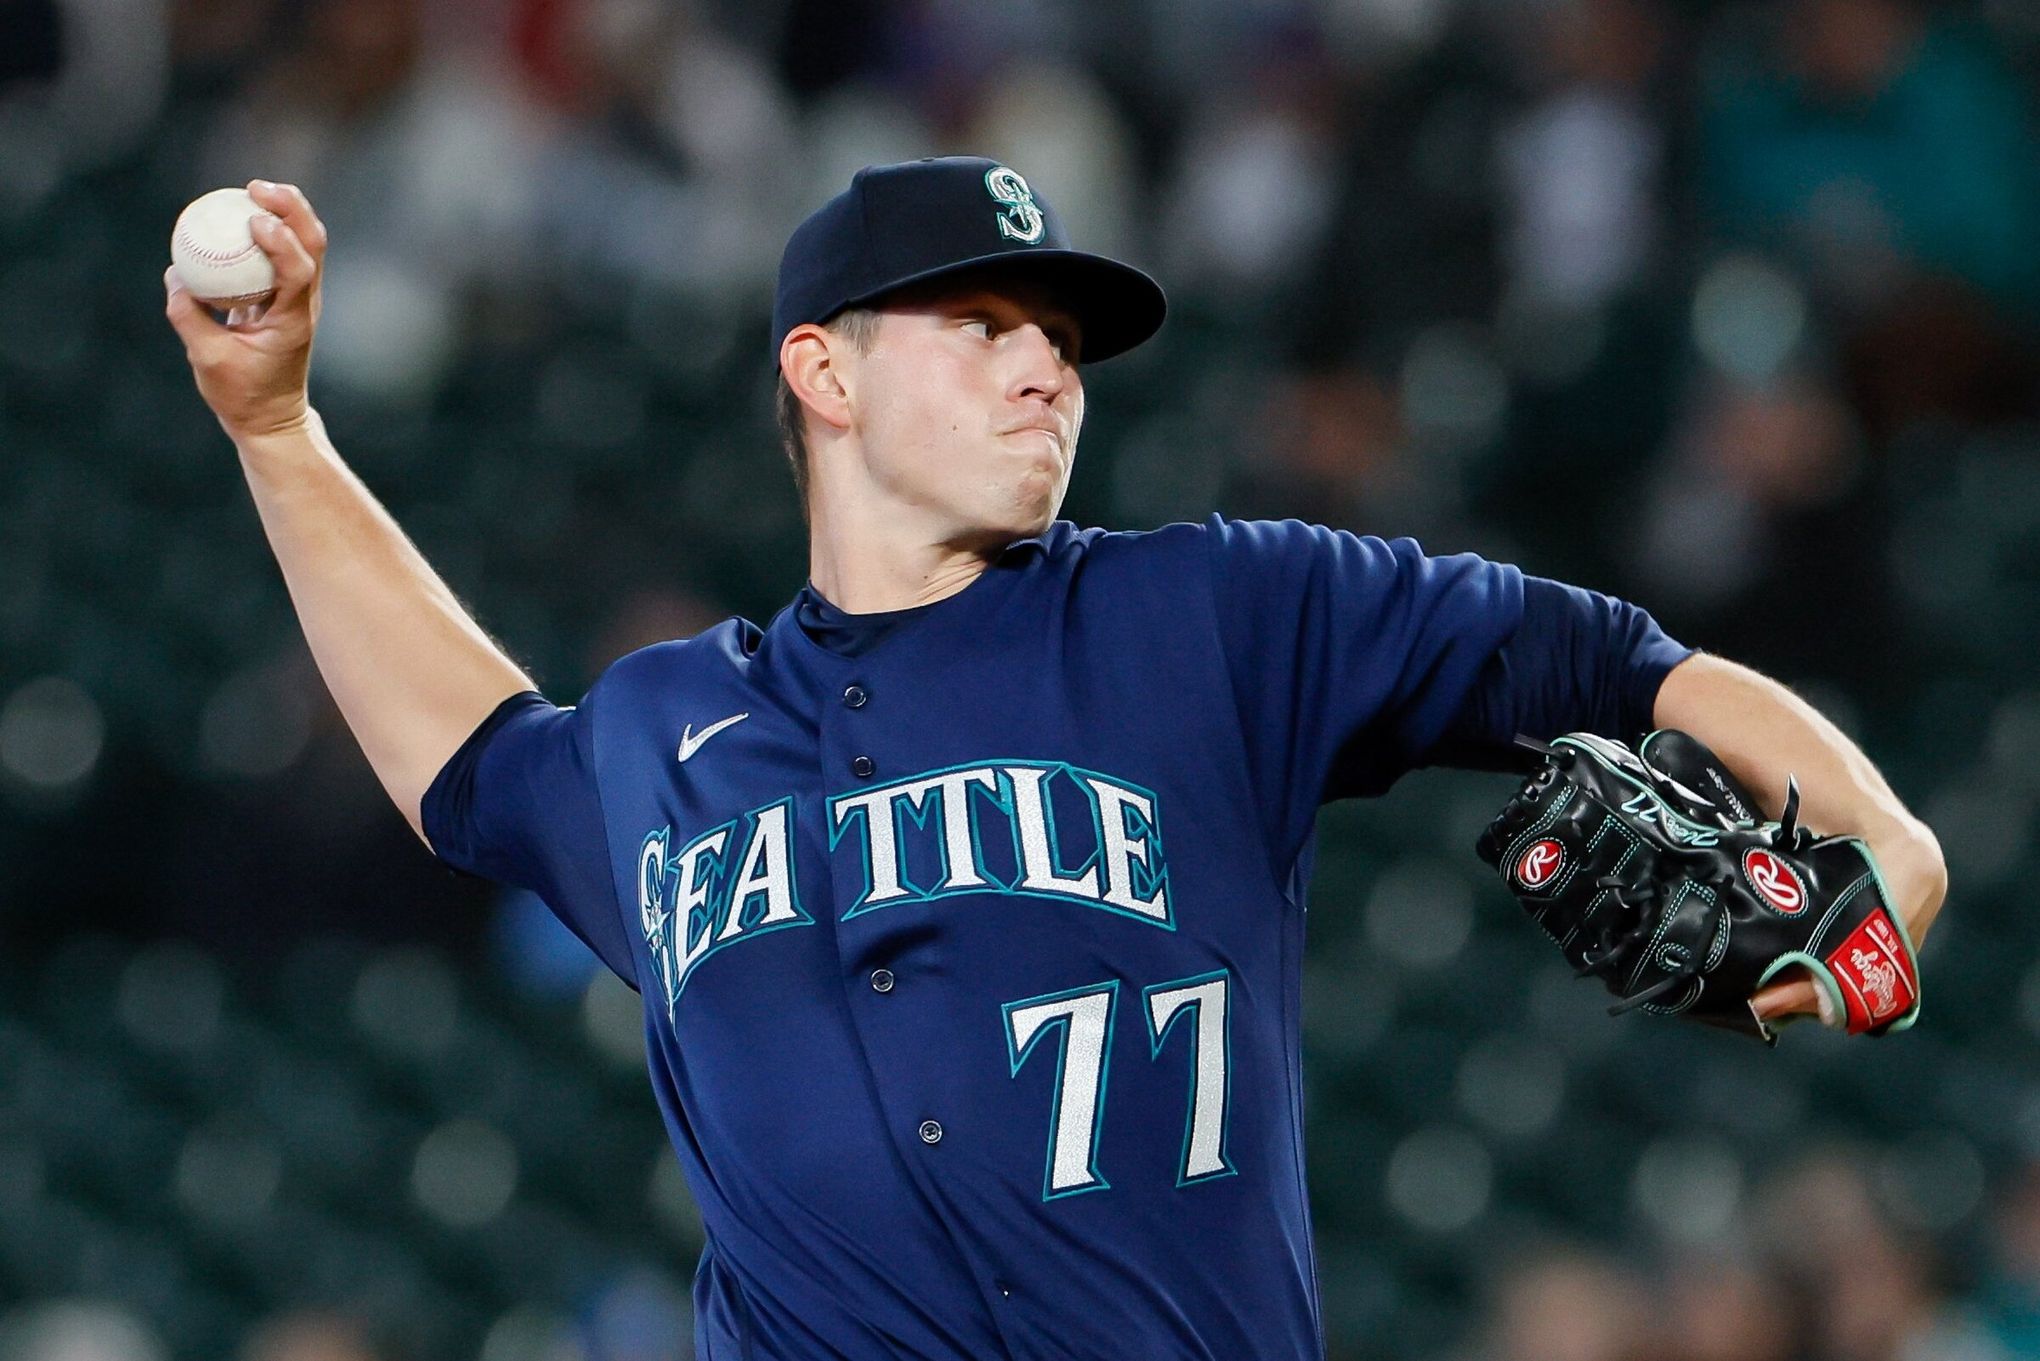 Mariners Chris Flexen is one of the best home pitchers in baseball